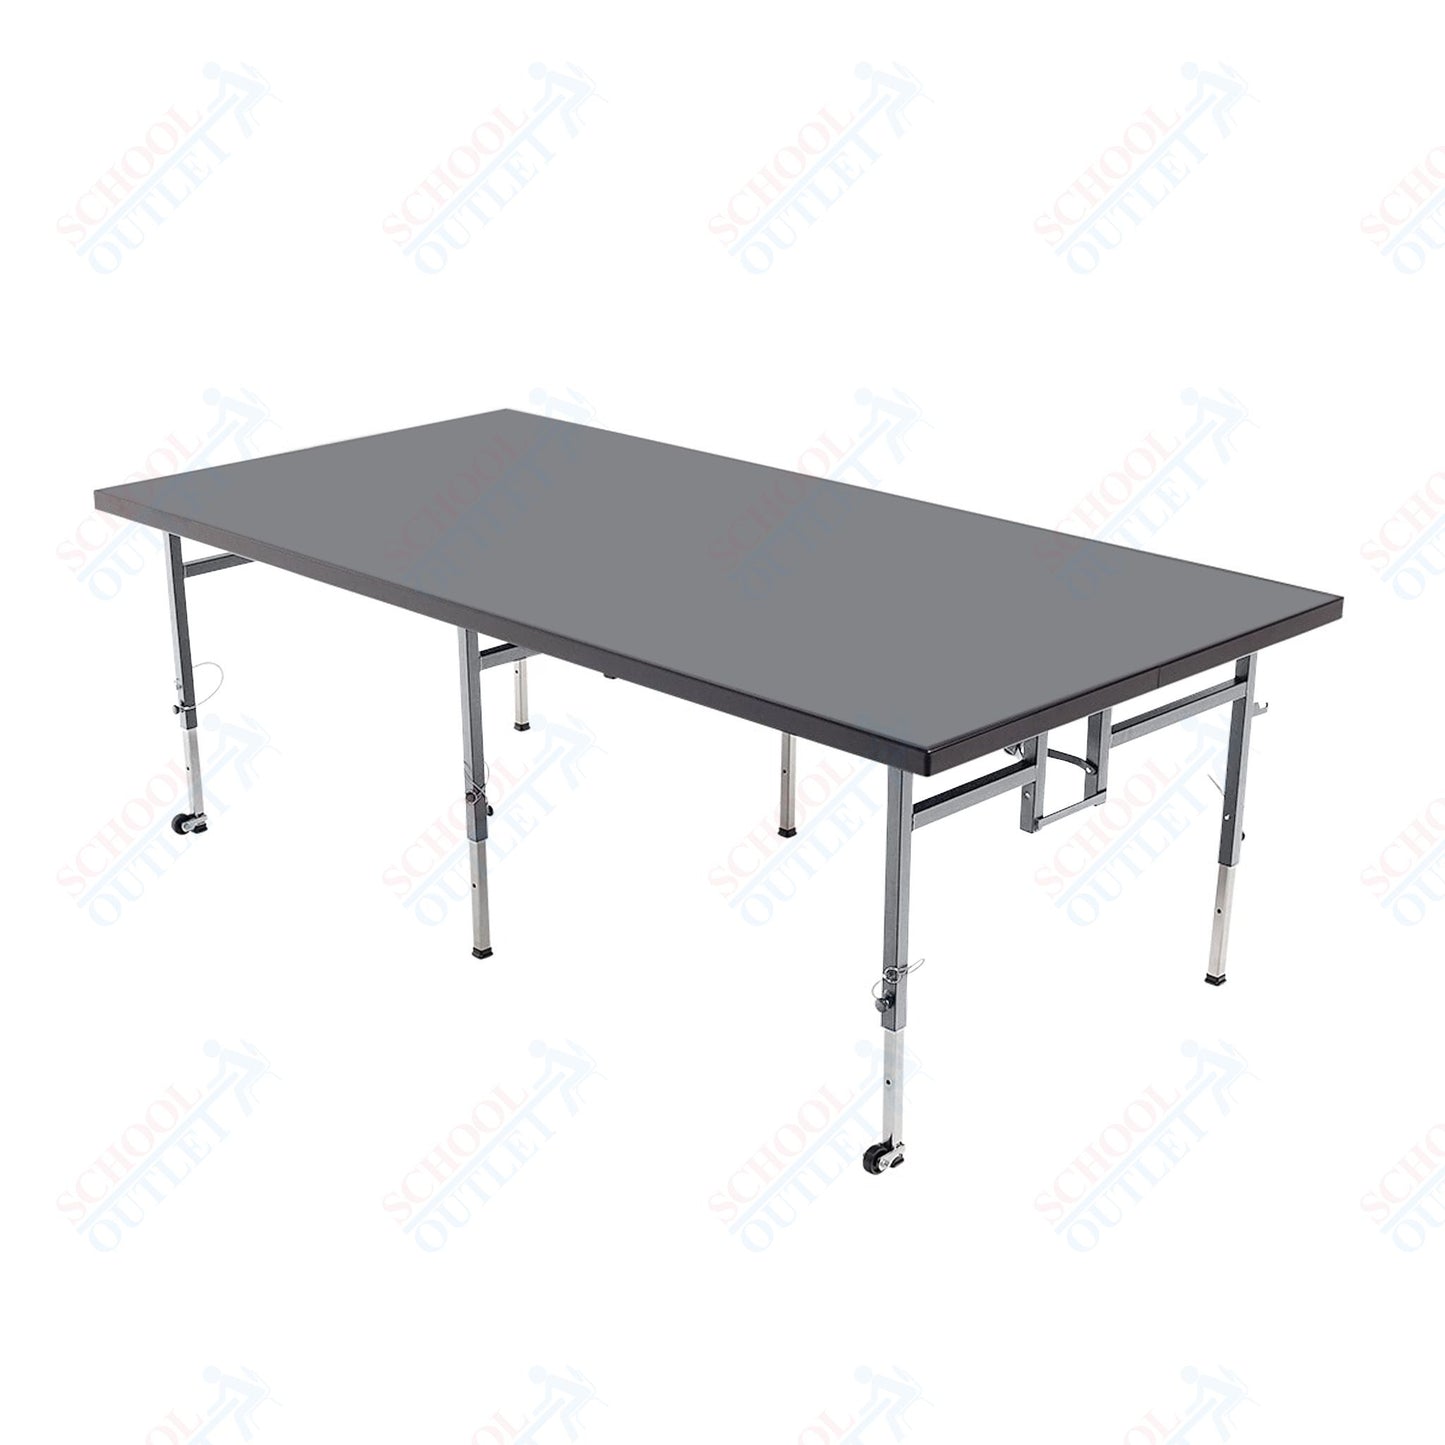 AmTab Adjustable Height Stage - Polypropylene Top - 48"W x 72"L x Adjustable 16" to 24"H  (AmTab AMT-STA4616P)